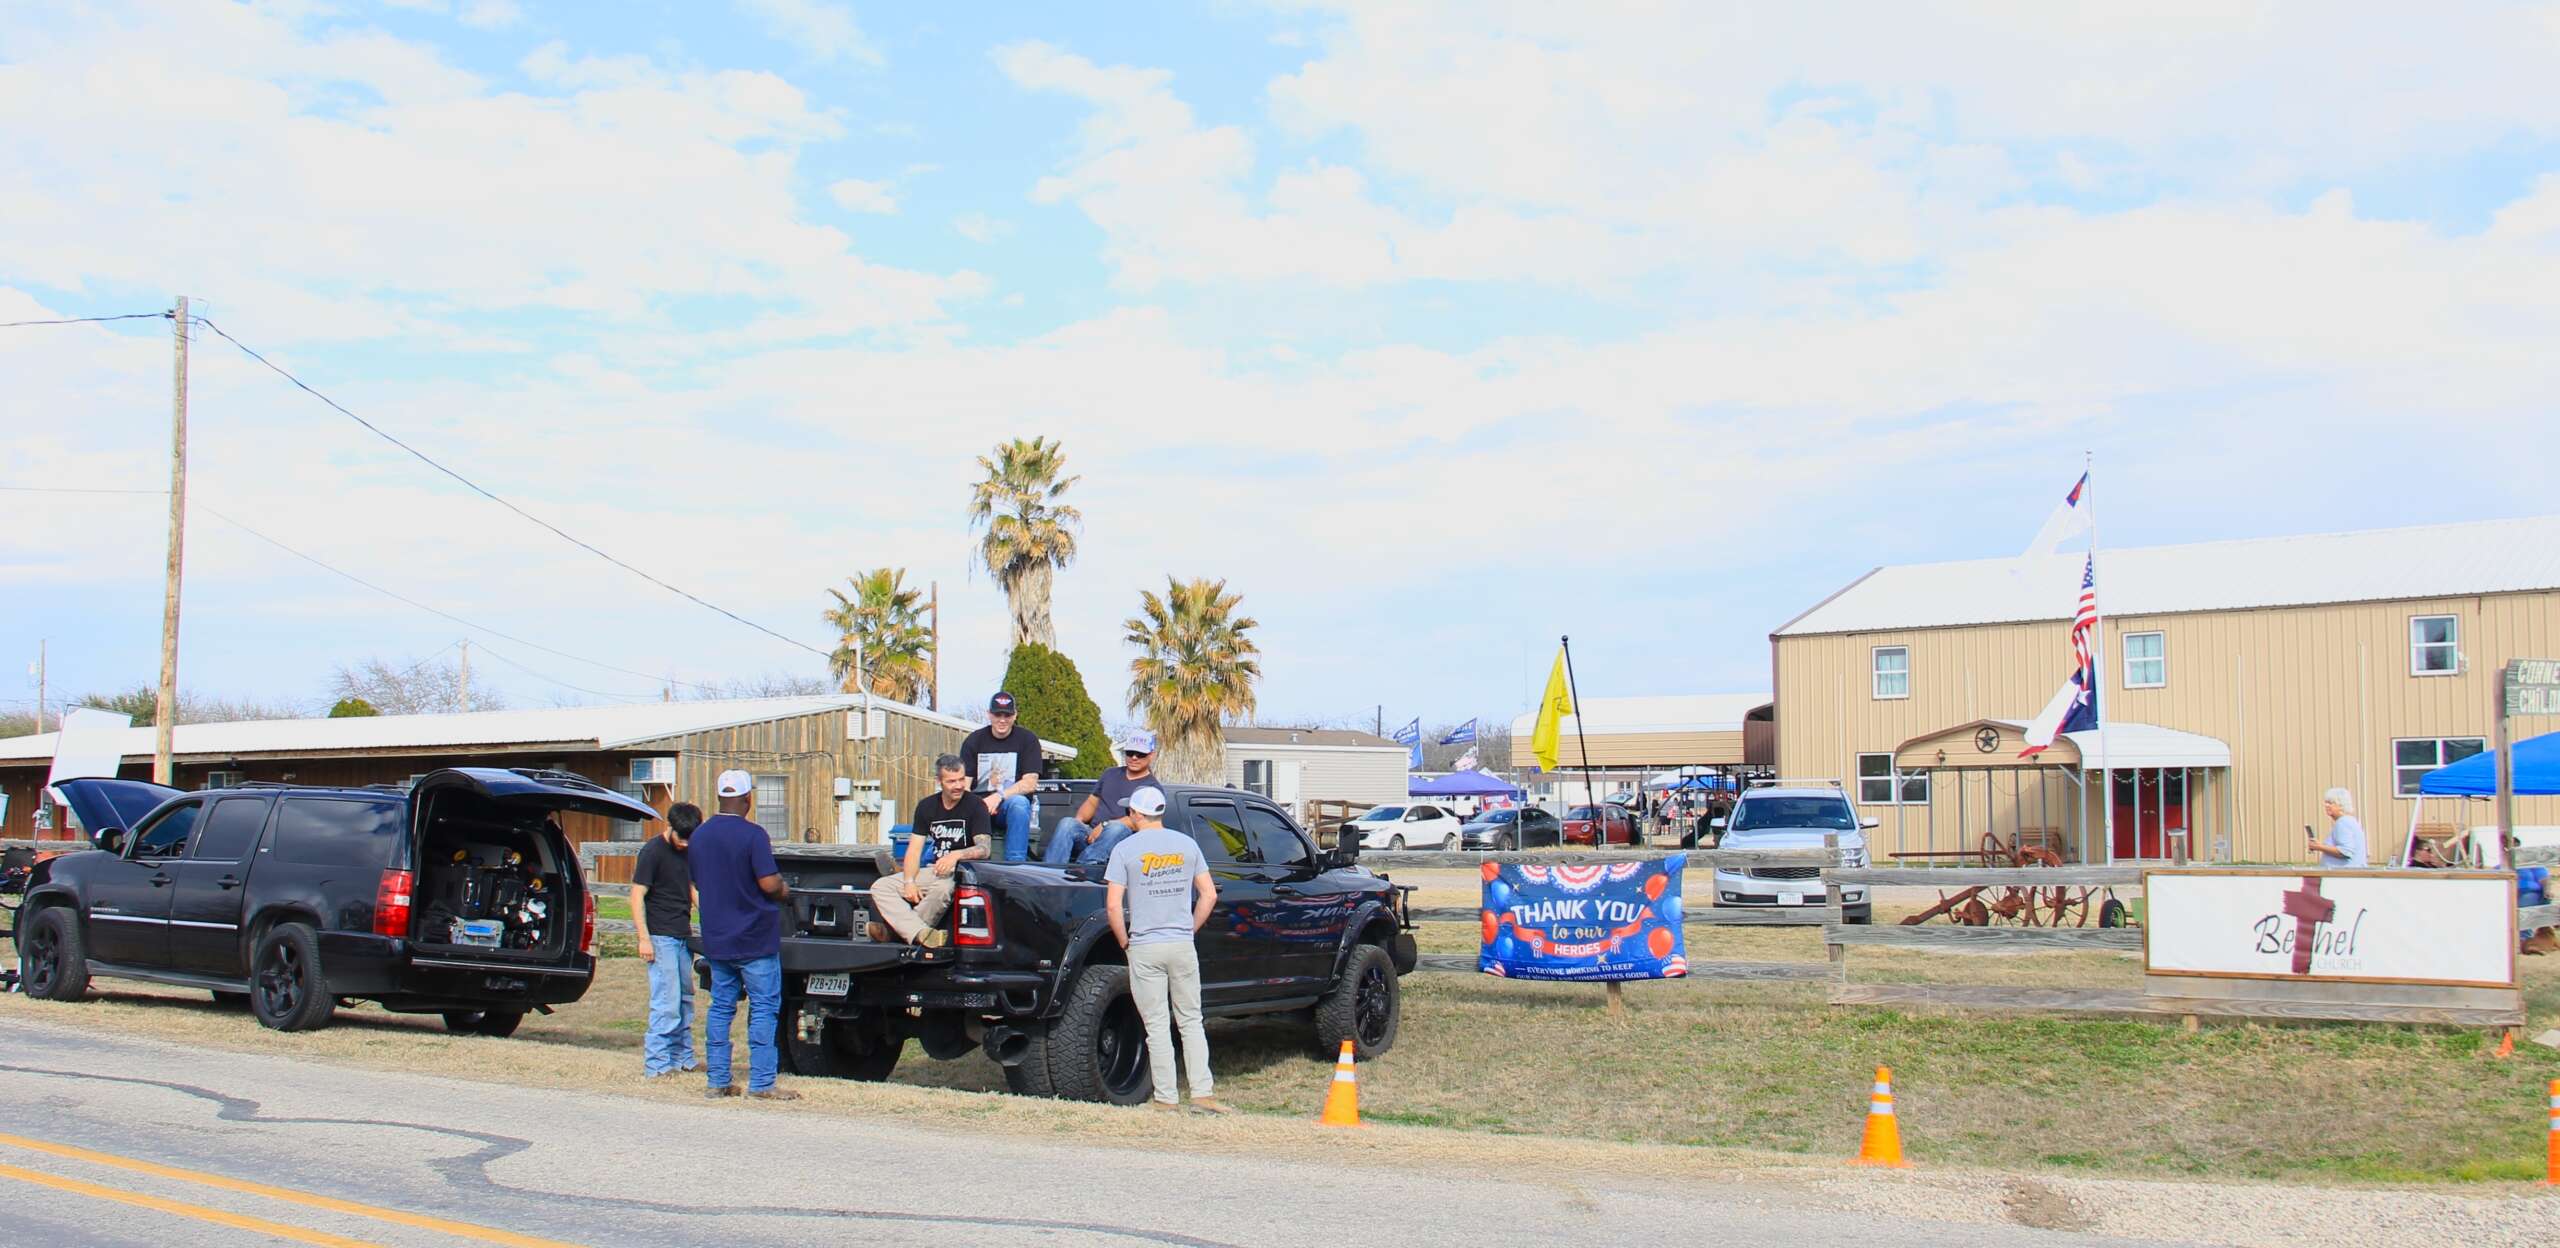 Supporters of the "Take Our Border Back" convoy of Christian nationalists tailgate outside the Cornerstone Children's before the arrival of the convoy on February 2 in Quemado, Texas.